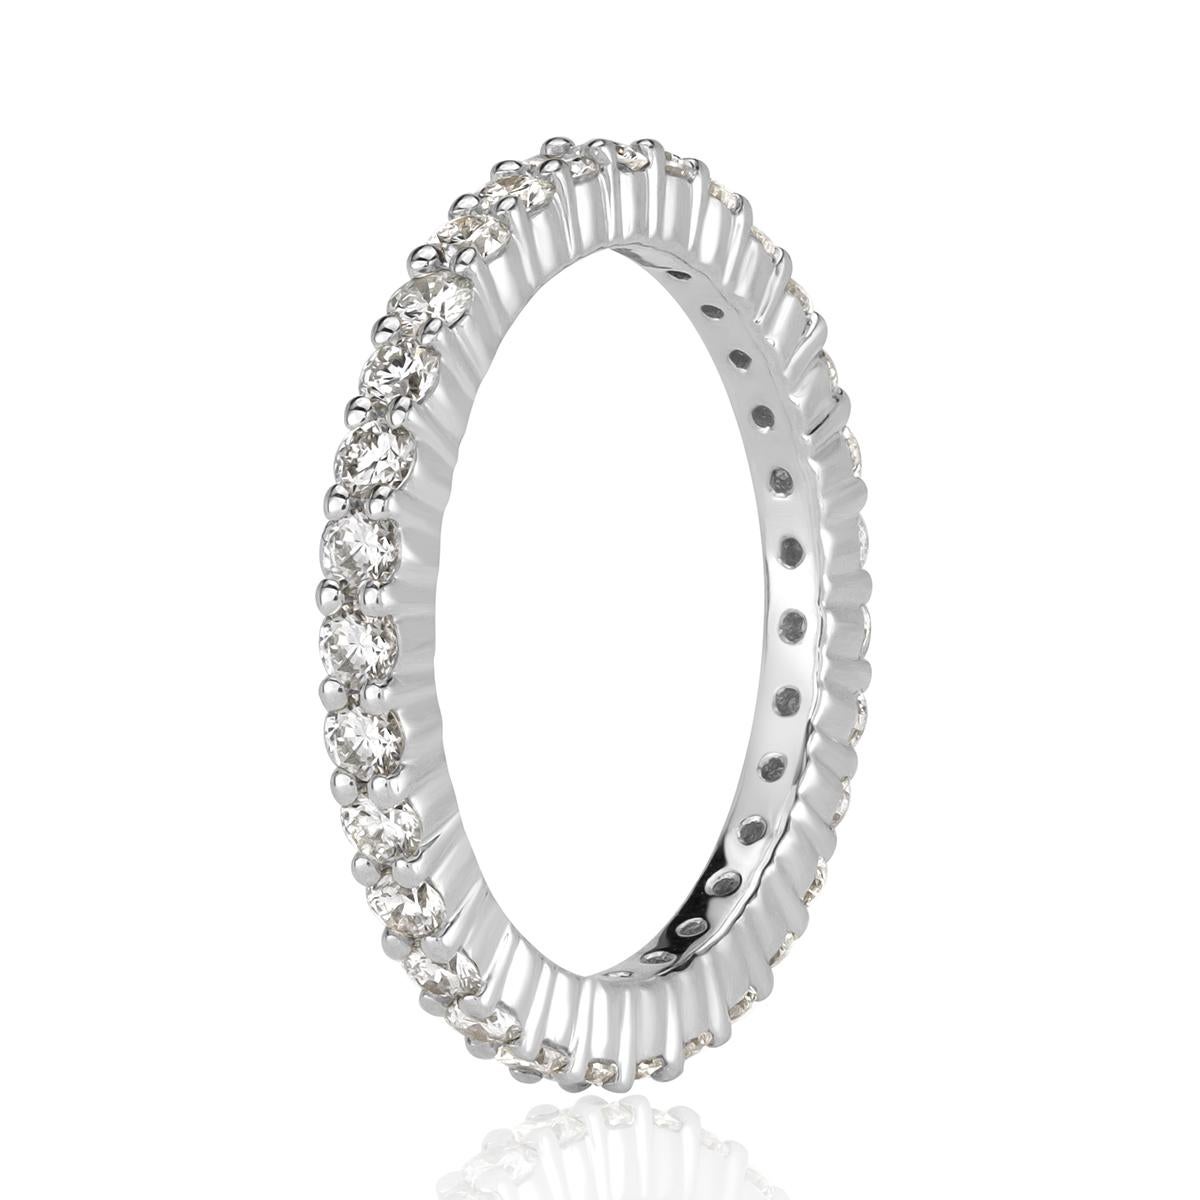 Custom created to perfection in 18k white gold, this stunning diamond eternity band showacses 1.00ct of round brilliant cut diamonds graded at E-F in color, VS1-VS2 in clarity. All eternity bands are shown in a size 6.5. We custom craft each